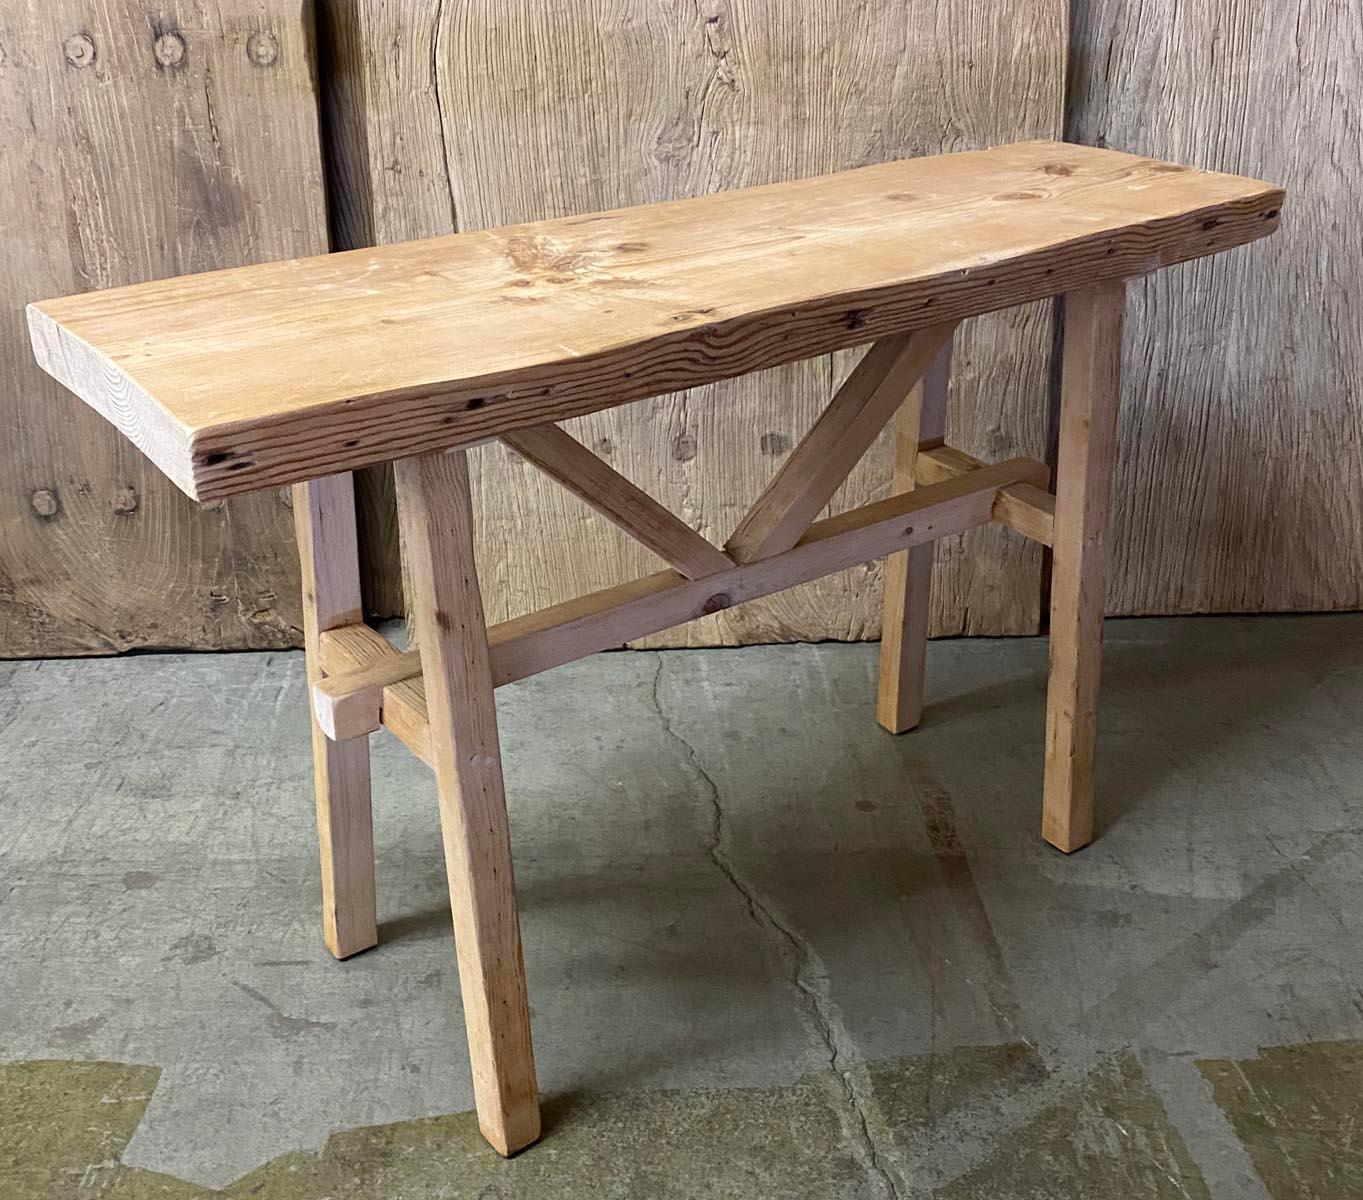 This console is made from vintage reclaimed Douglas fir. It shows age appropriate wear such as old cracks and nail holes but has a smooth finish. Raw, natural wood with a dead flat finish.